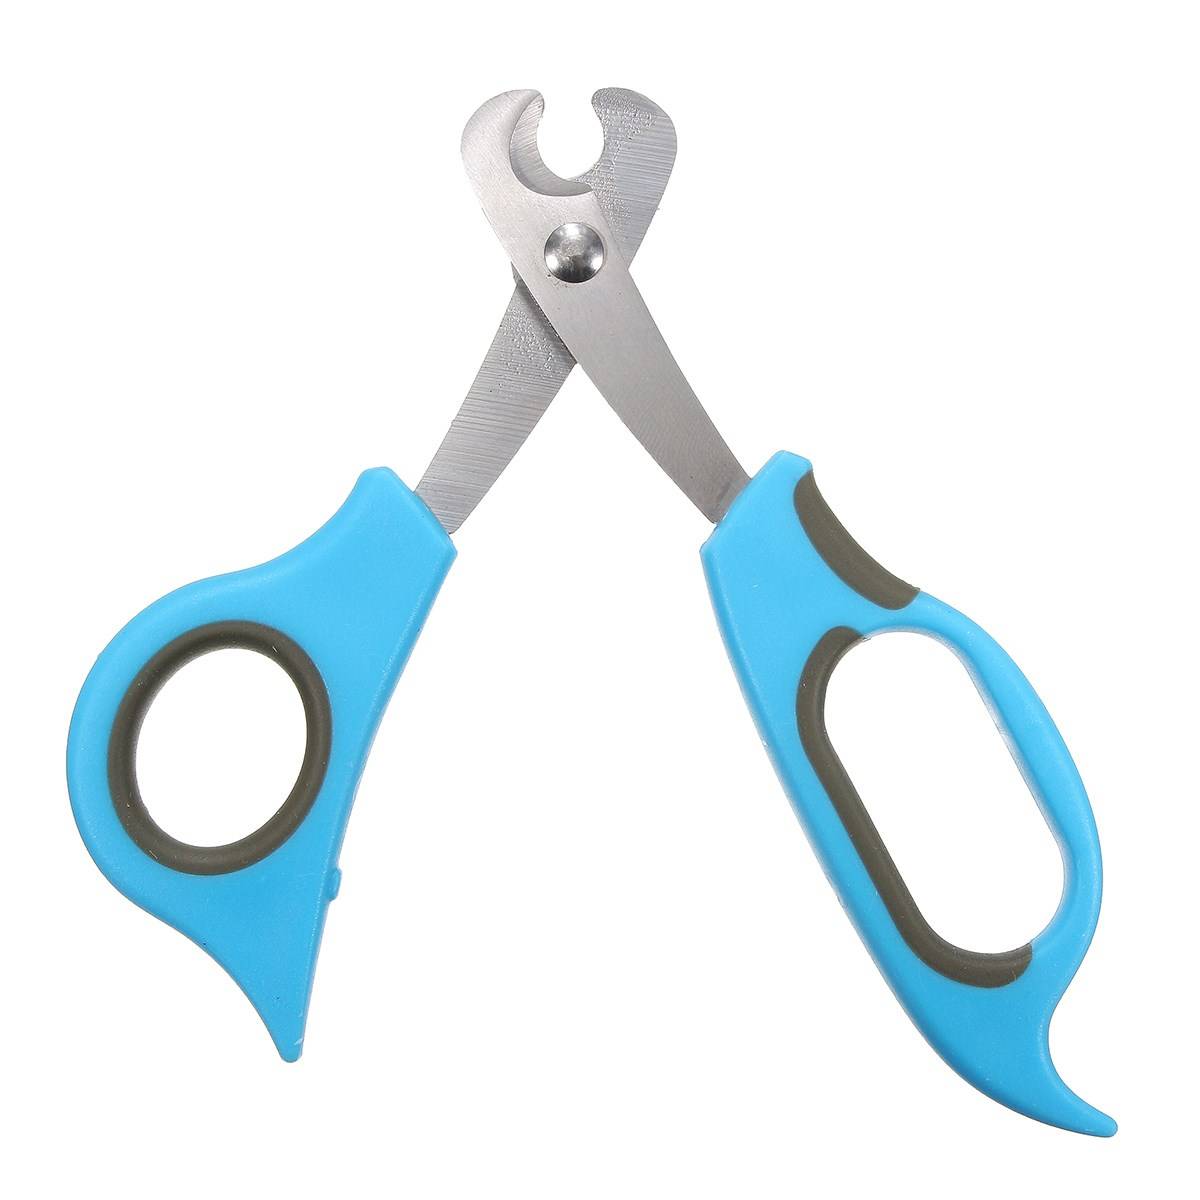 Metal Scissors for Nail Cats Cats Grooming & Care